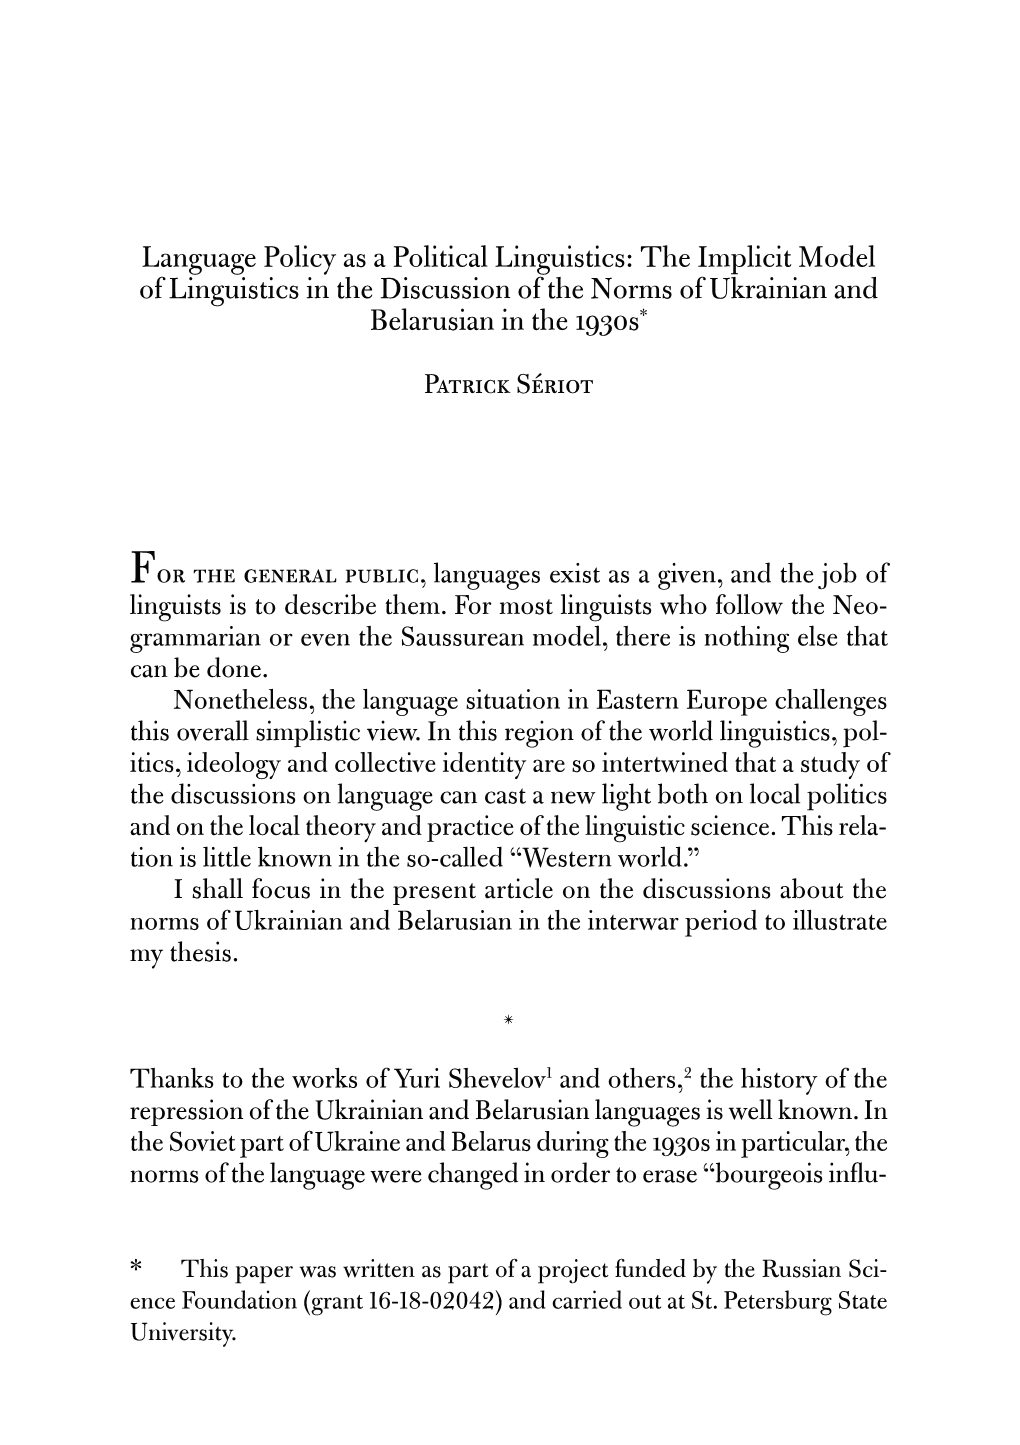 Language Policy As a Political Linguistics: the Implicit Model of Linguistics in the Discussion of the Norms of Ukrainian and Belarusian in the 1930S*